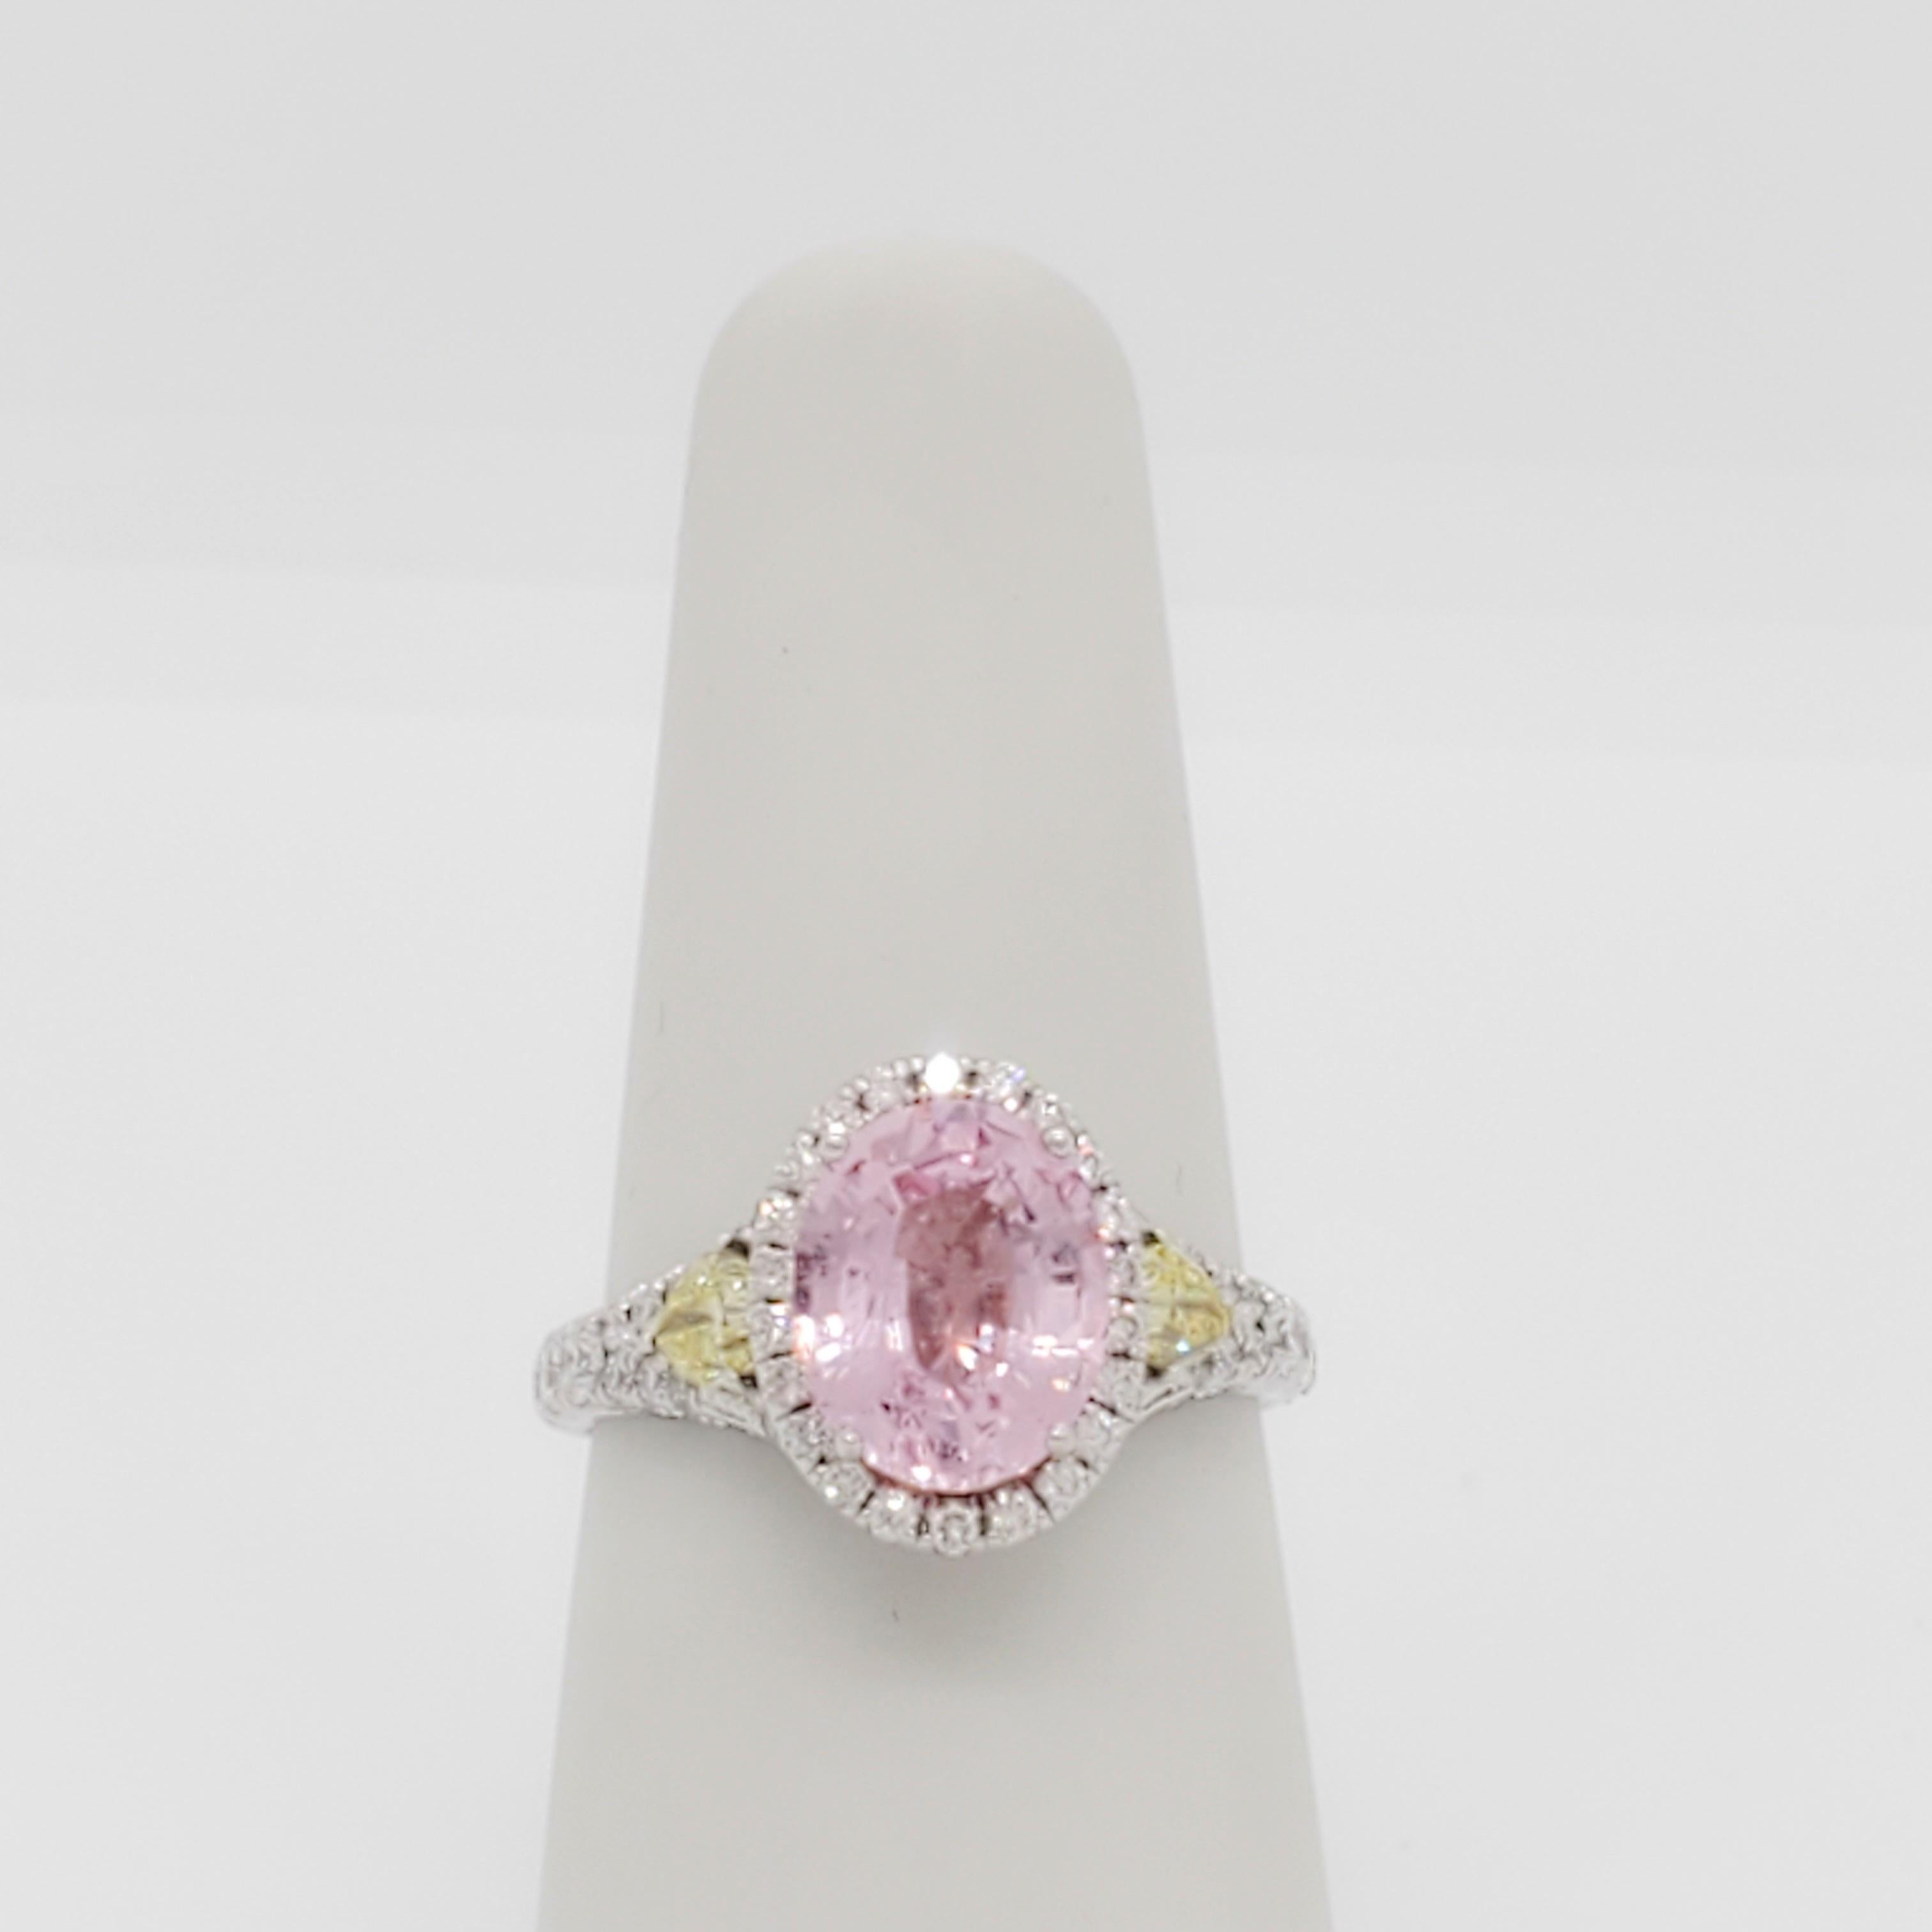 Women's or Men's GIA Pink Sapphire, Yellow and White Diamond Cocktail Ring in 18k White Gold